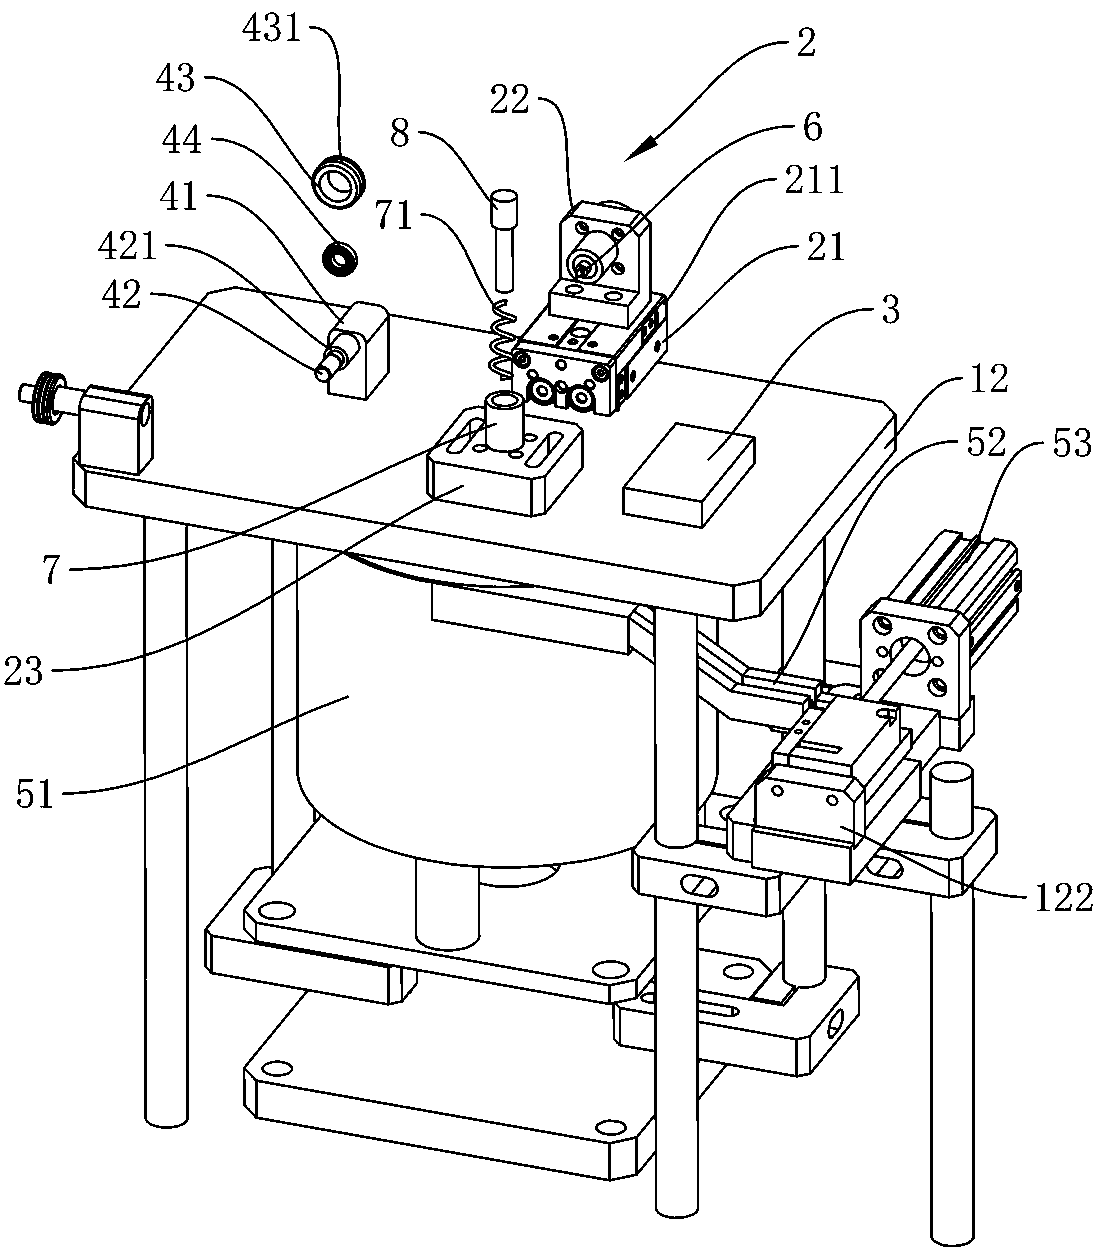 Assembling and conduction detecting integrated device for ignition coil